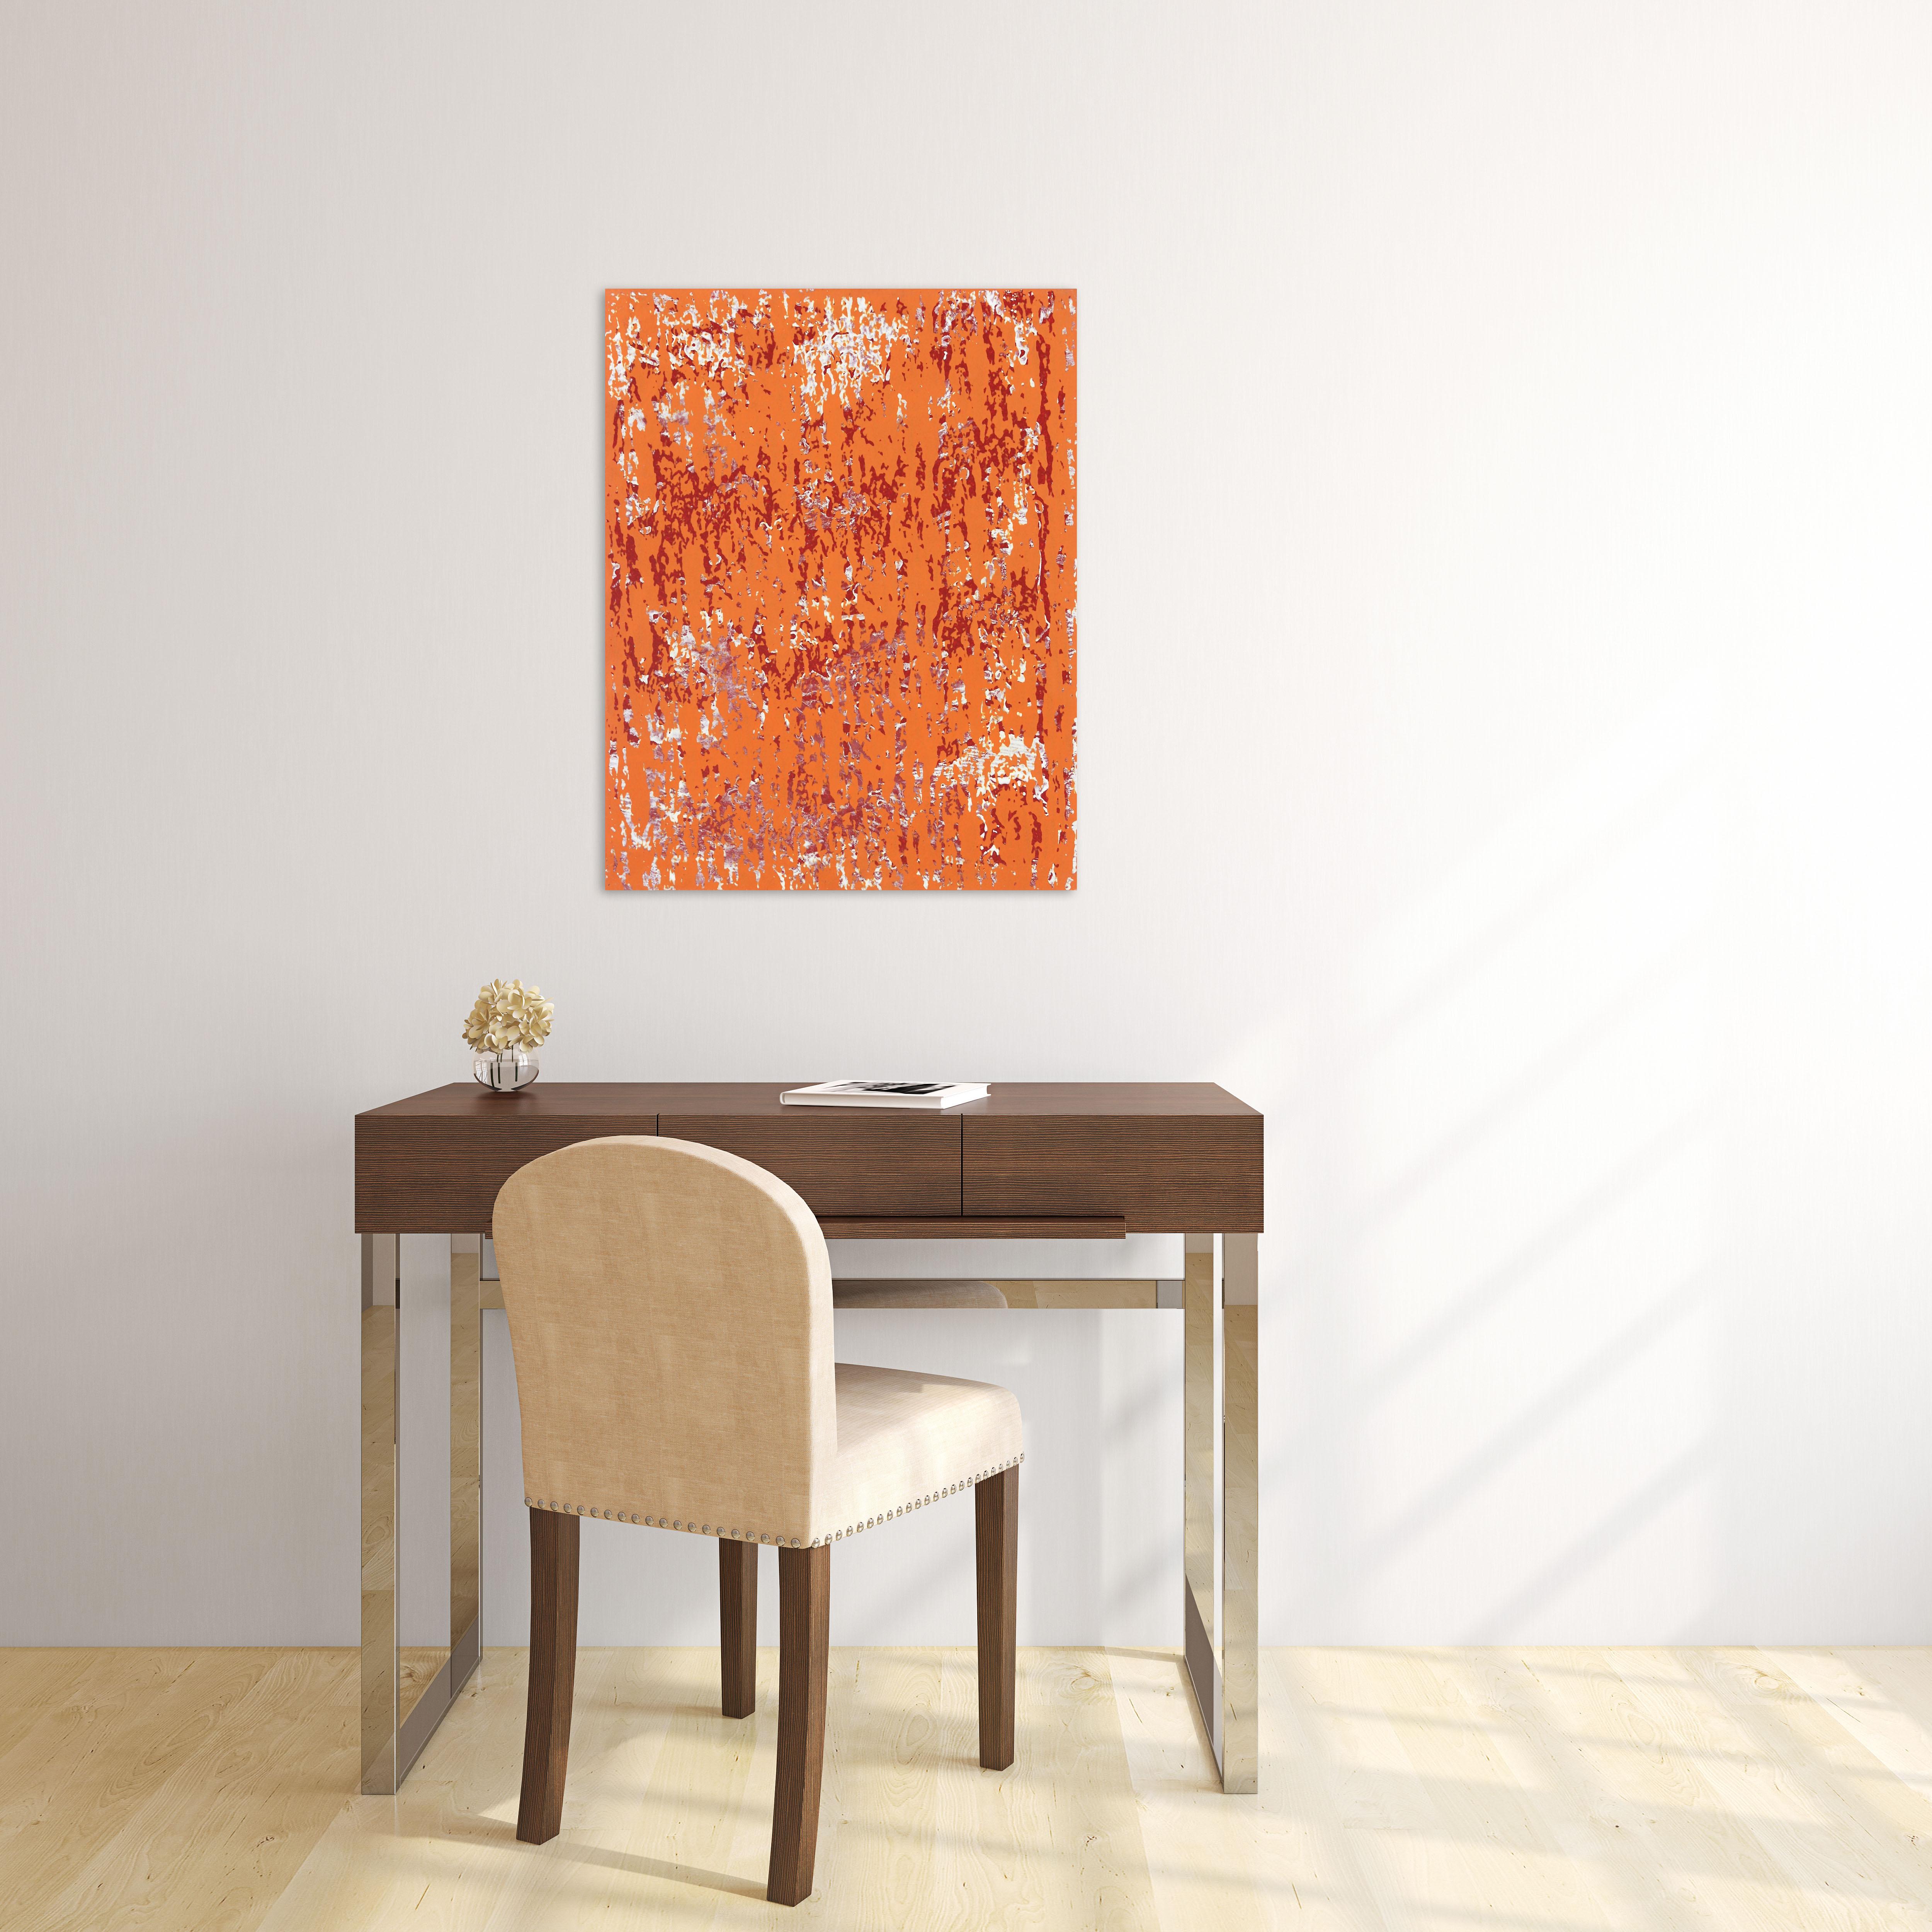 A322 - Minimalist Abstract Original Orange Red White Textural Artwork - Painting by Marco Schmidli